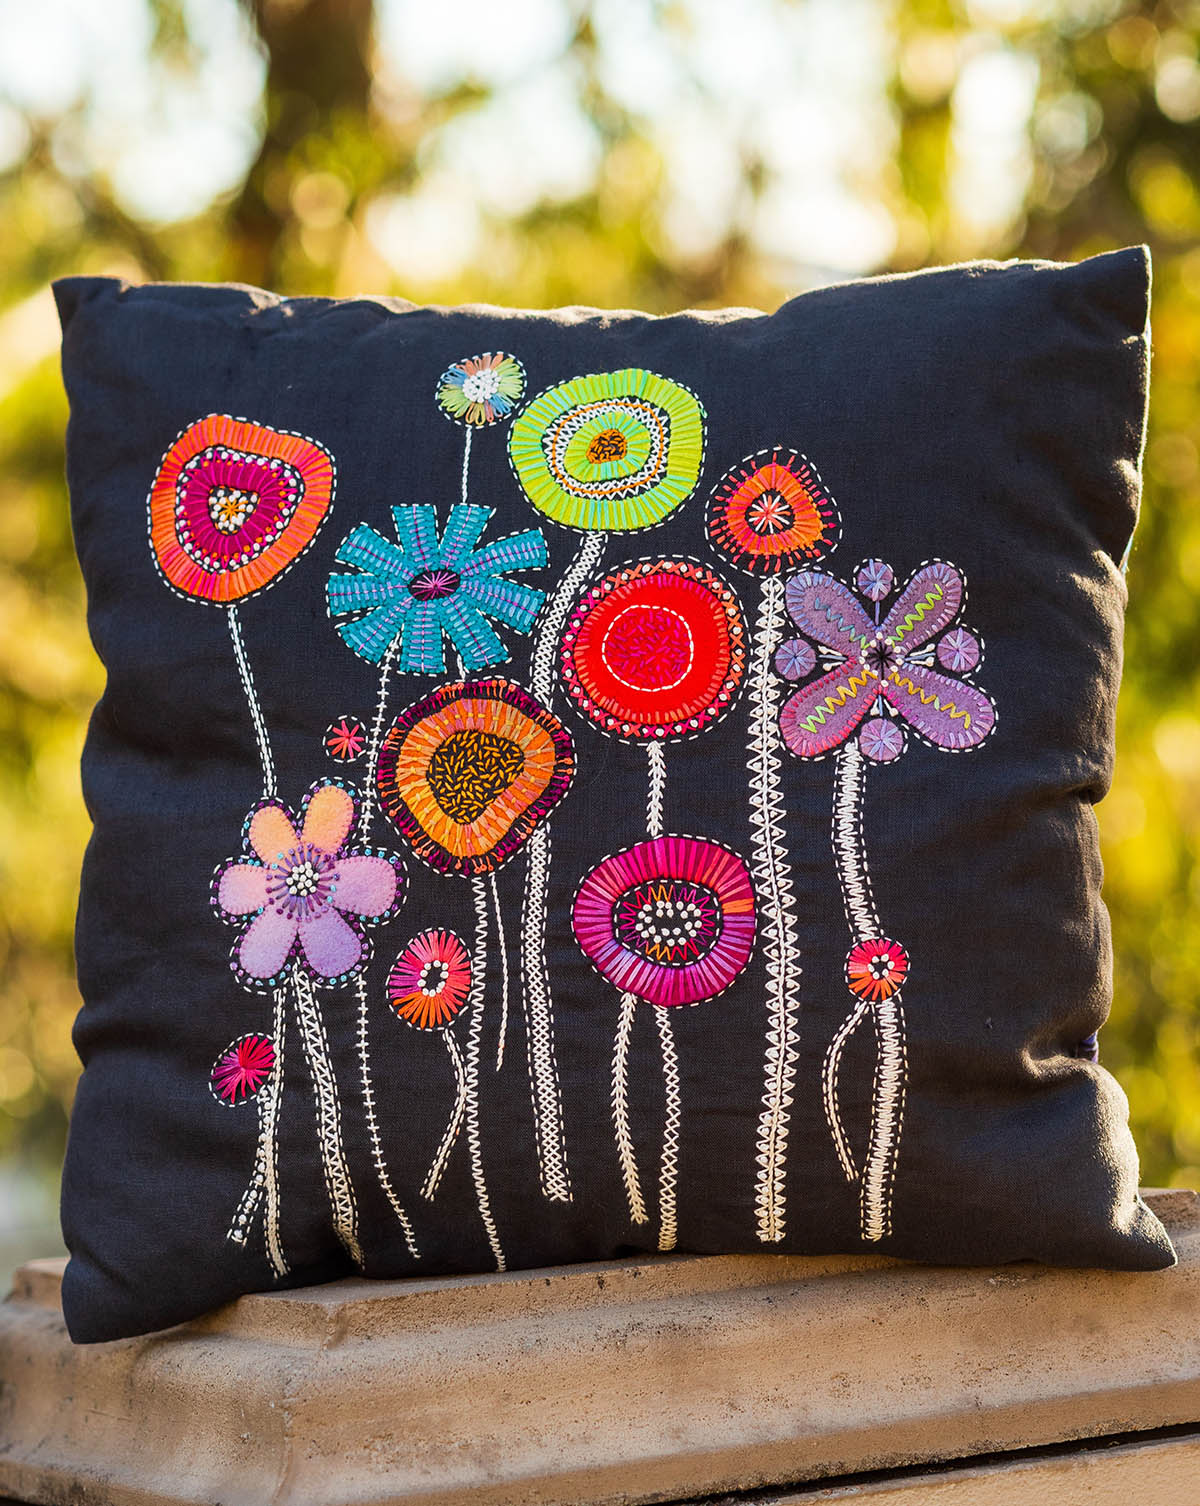 Applique cushion cover mixture of machine applique and hand embroidery flower design in pink and blue